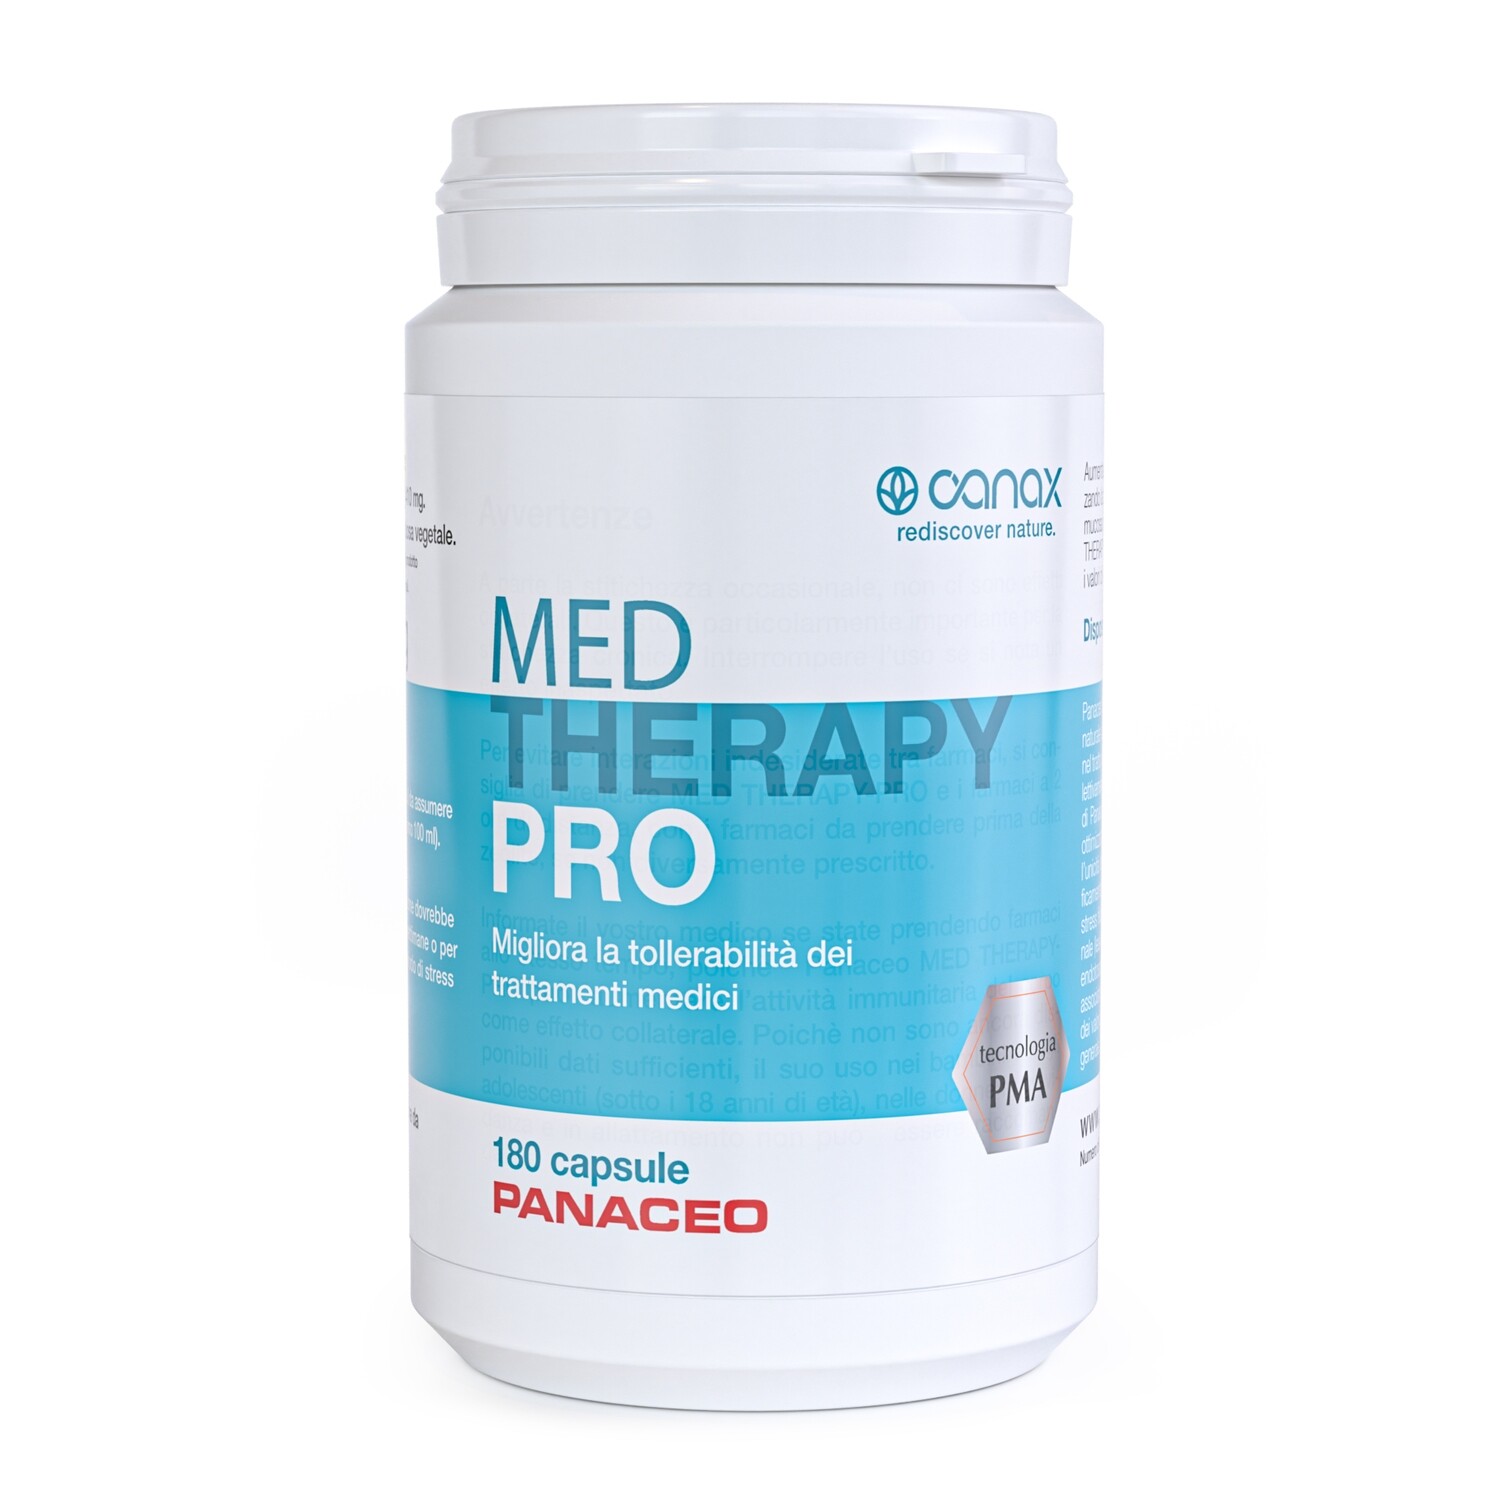 ZEOLITE PANACEO MED THERAPY PRO 180 capsule